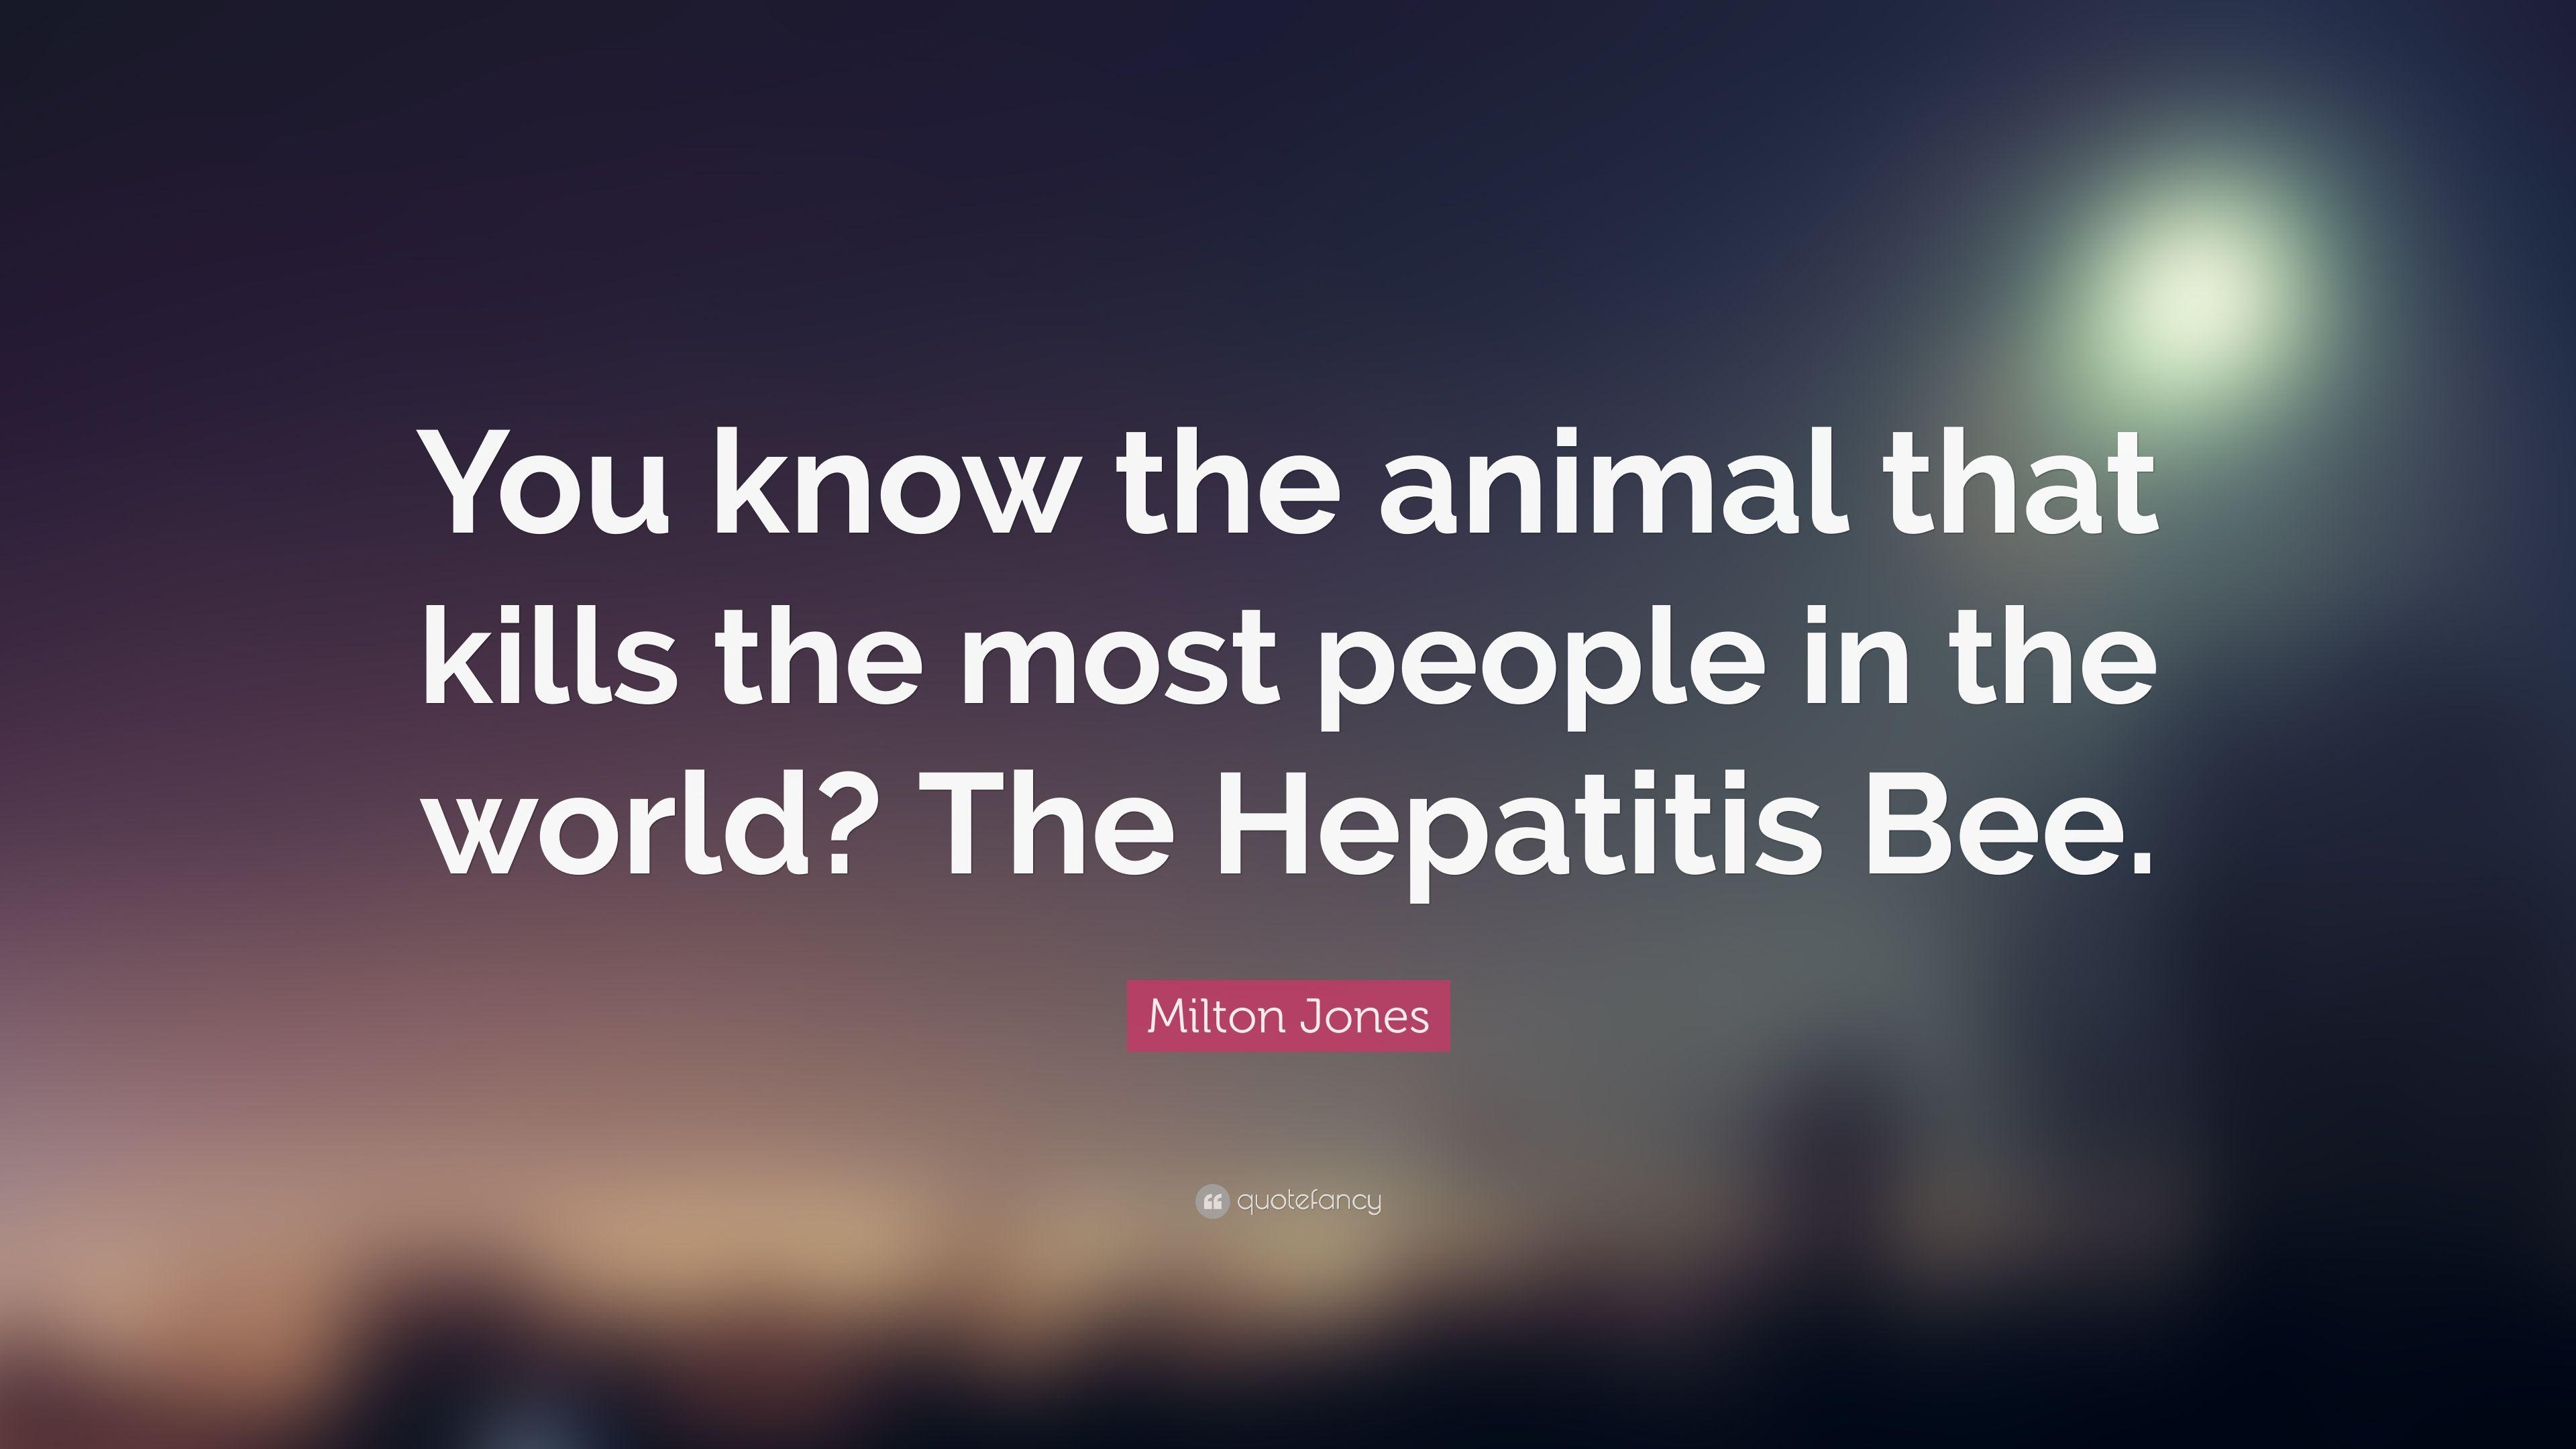 Milton Jones Quote: “You know the animal that kills the most people